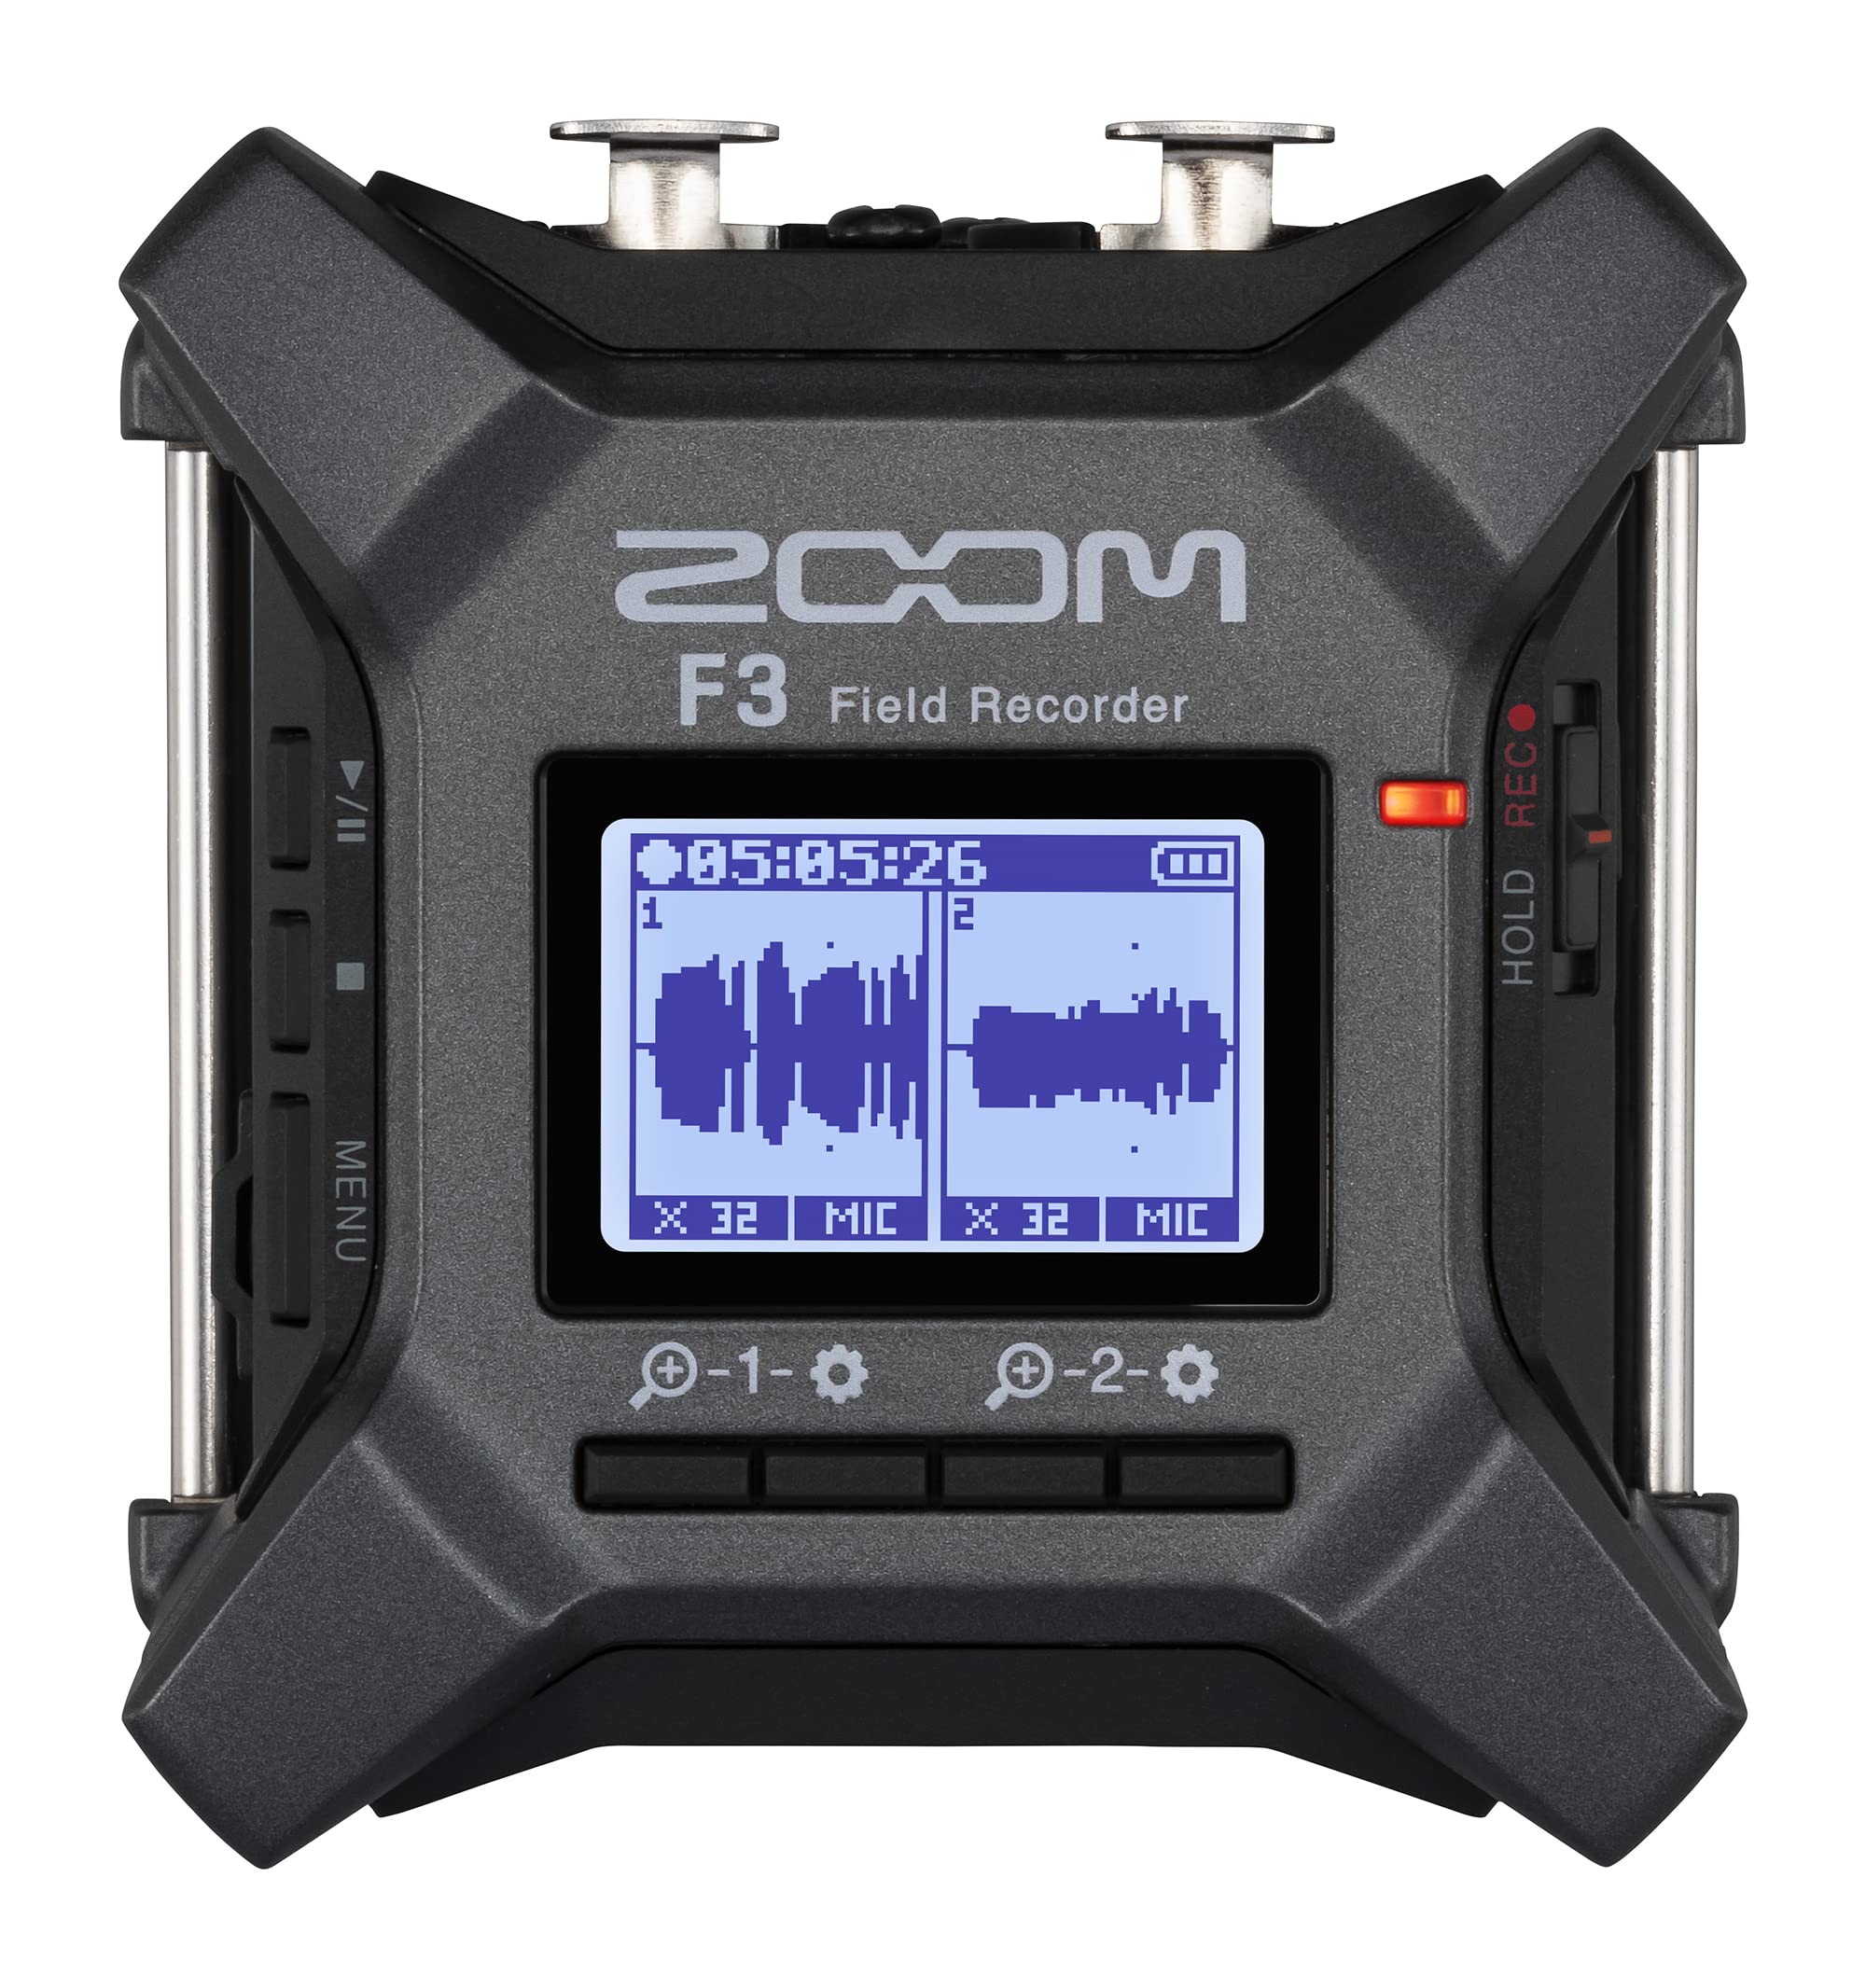 Zoom F3 Professional Field Recorder, 32-bit Float Recording, 2 Channel Recorder, Dual AD Converters, 2 Locking XLR/TRS Inputs, Battery Powered, Wireless Control - $267